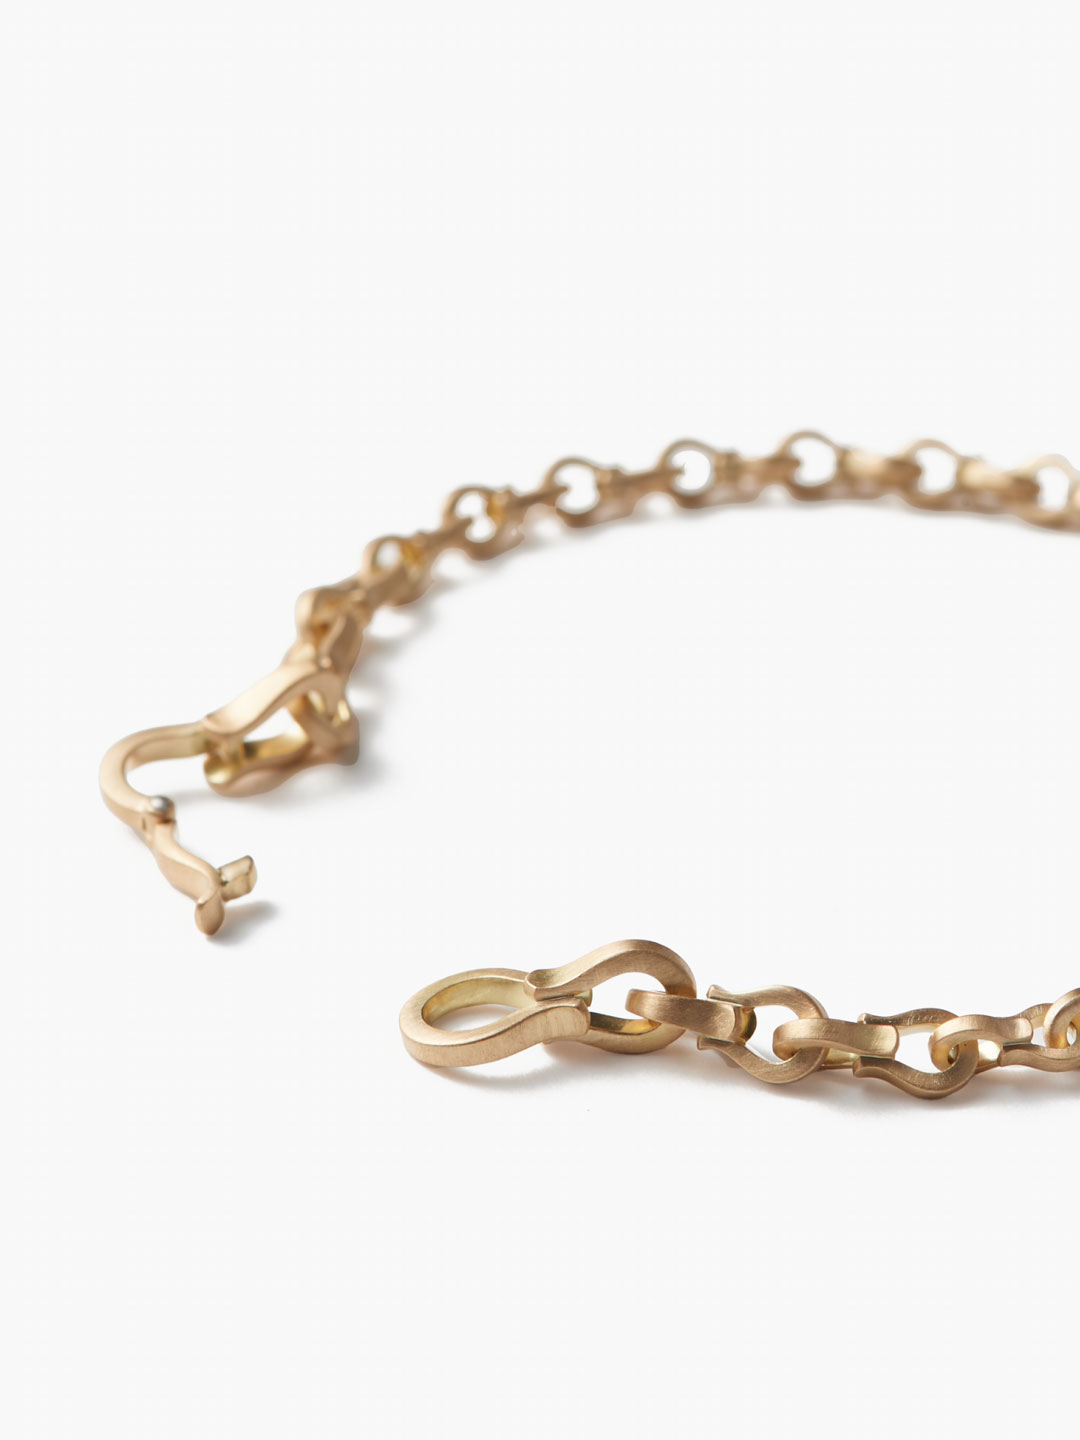 The Symbol Of Refined Metal Bracelet / S - Yellow Gold